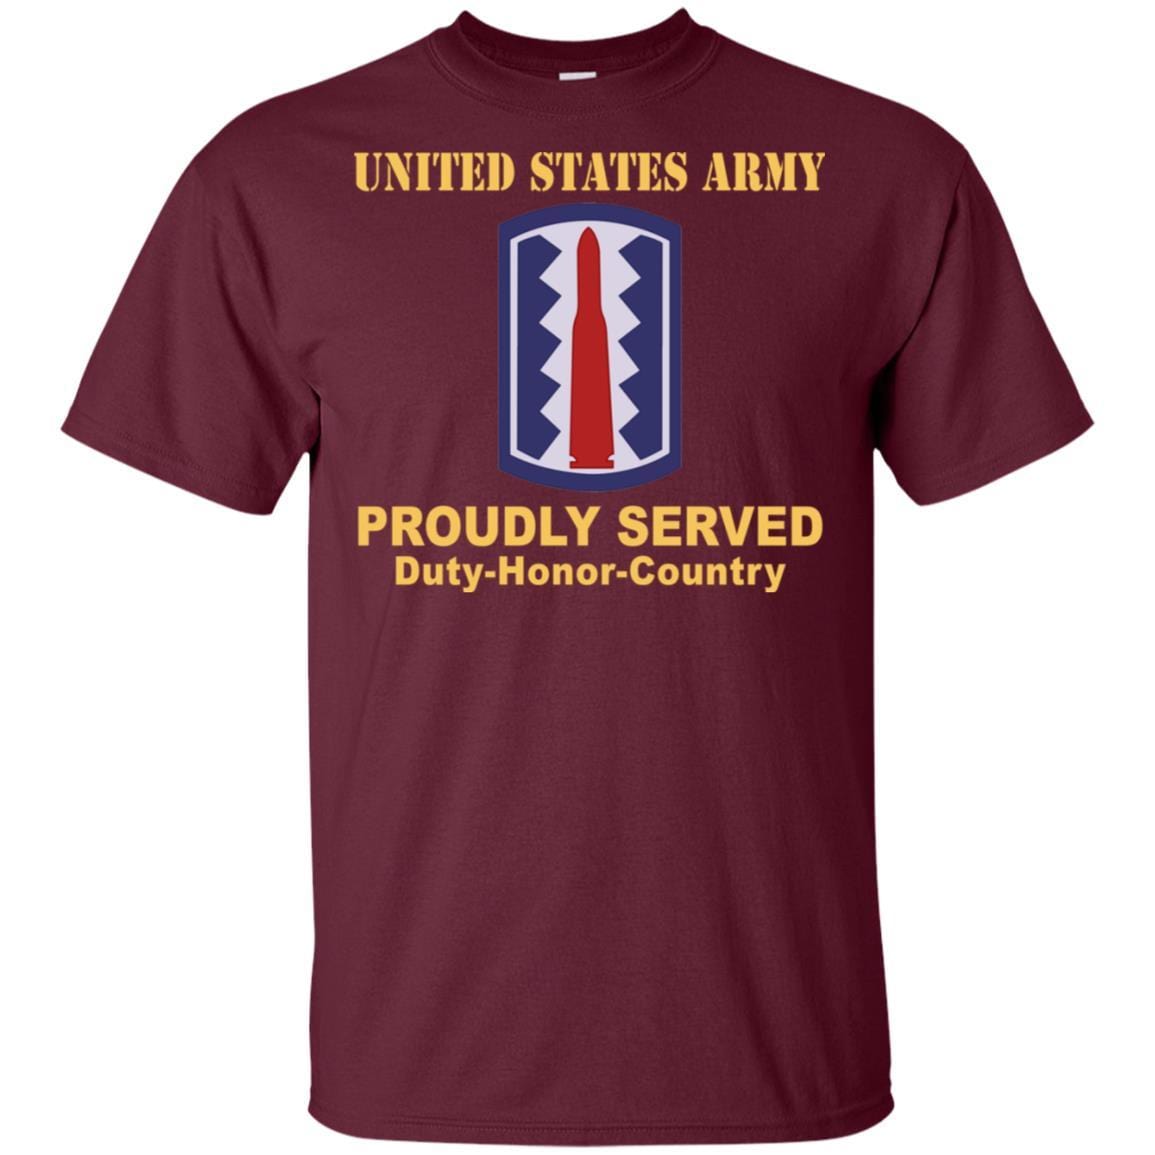 US ARMY 197TH INFANTRY BRIGADE - Proudly Served T-Shirt On Front For Men-TShirt-Army-Veterans Nation